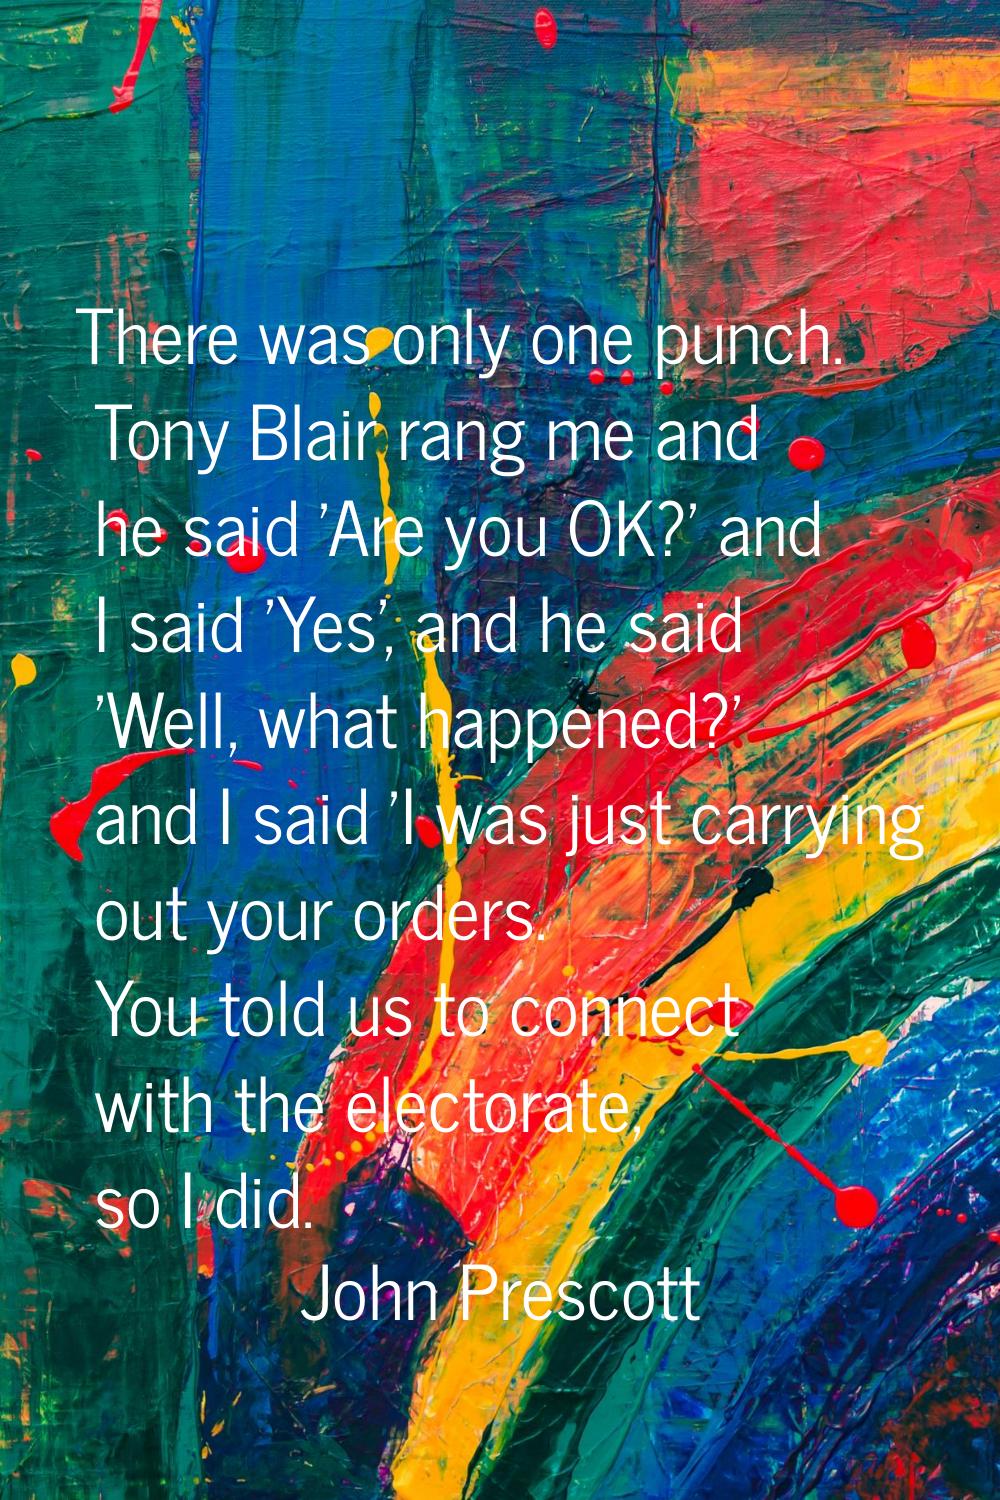 There was only one punch. Tony Blair rang me and he said 'Are you OK?' and I said 'Yes', and he sai